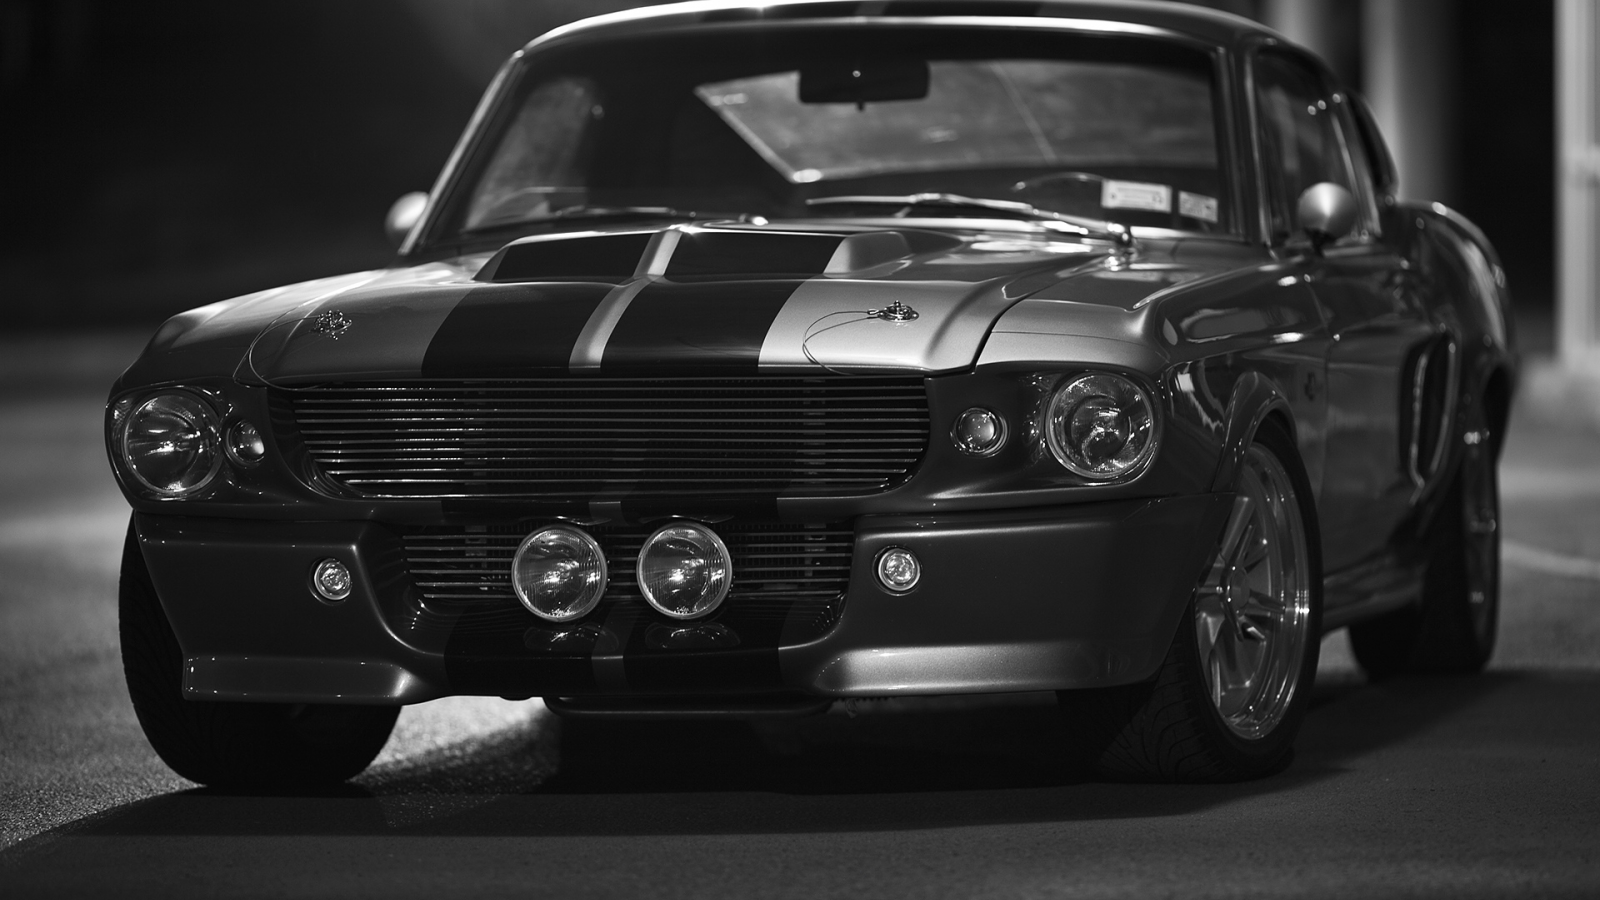 muscle car, eleanor, машина, gt500, shelby, mustang, ford